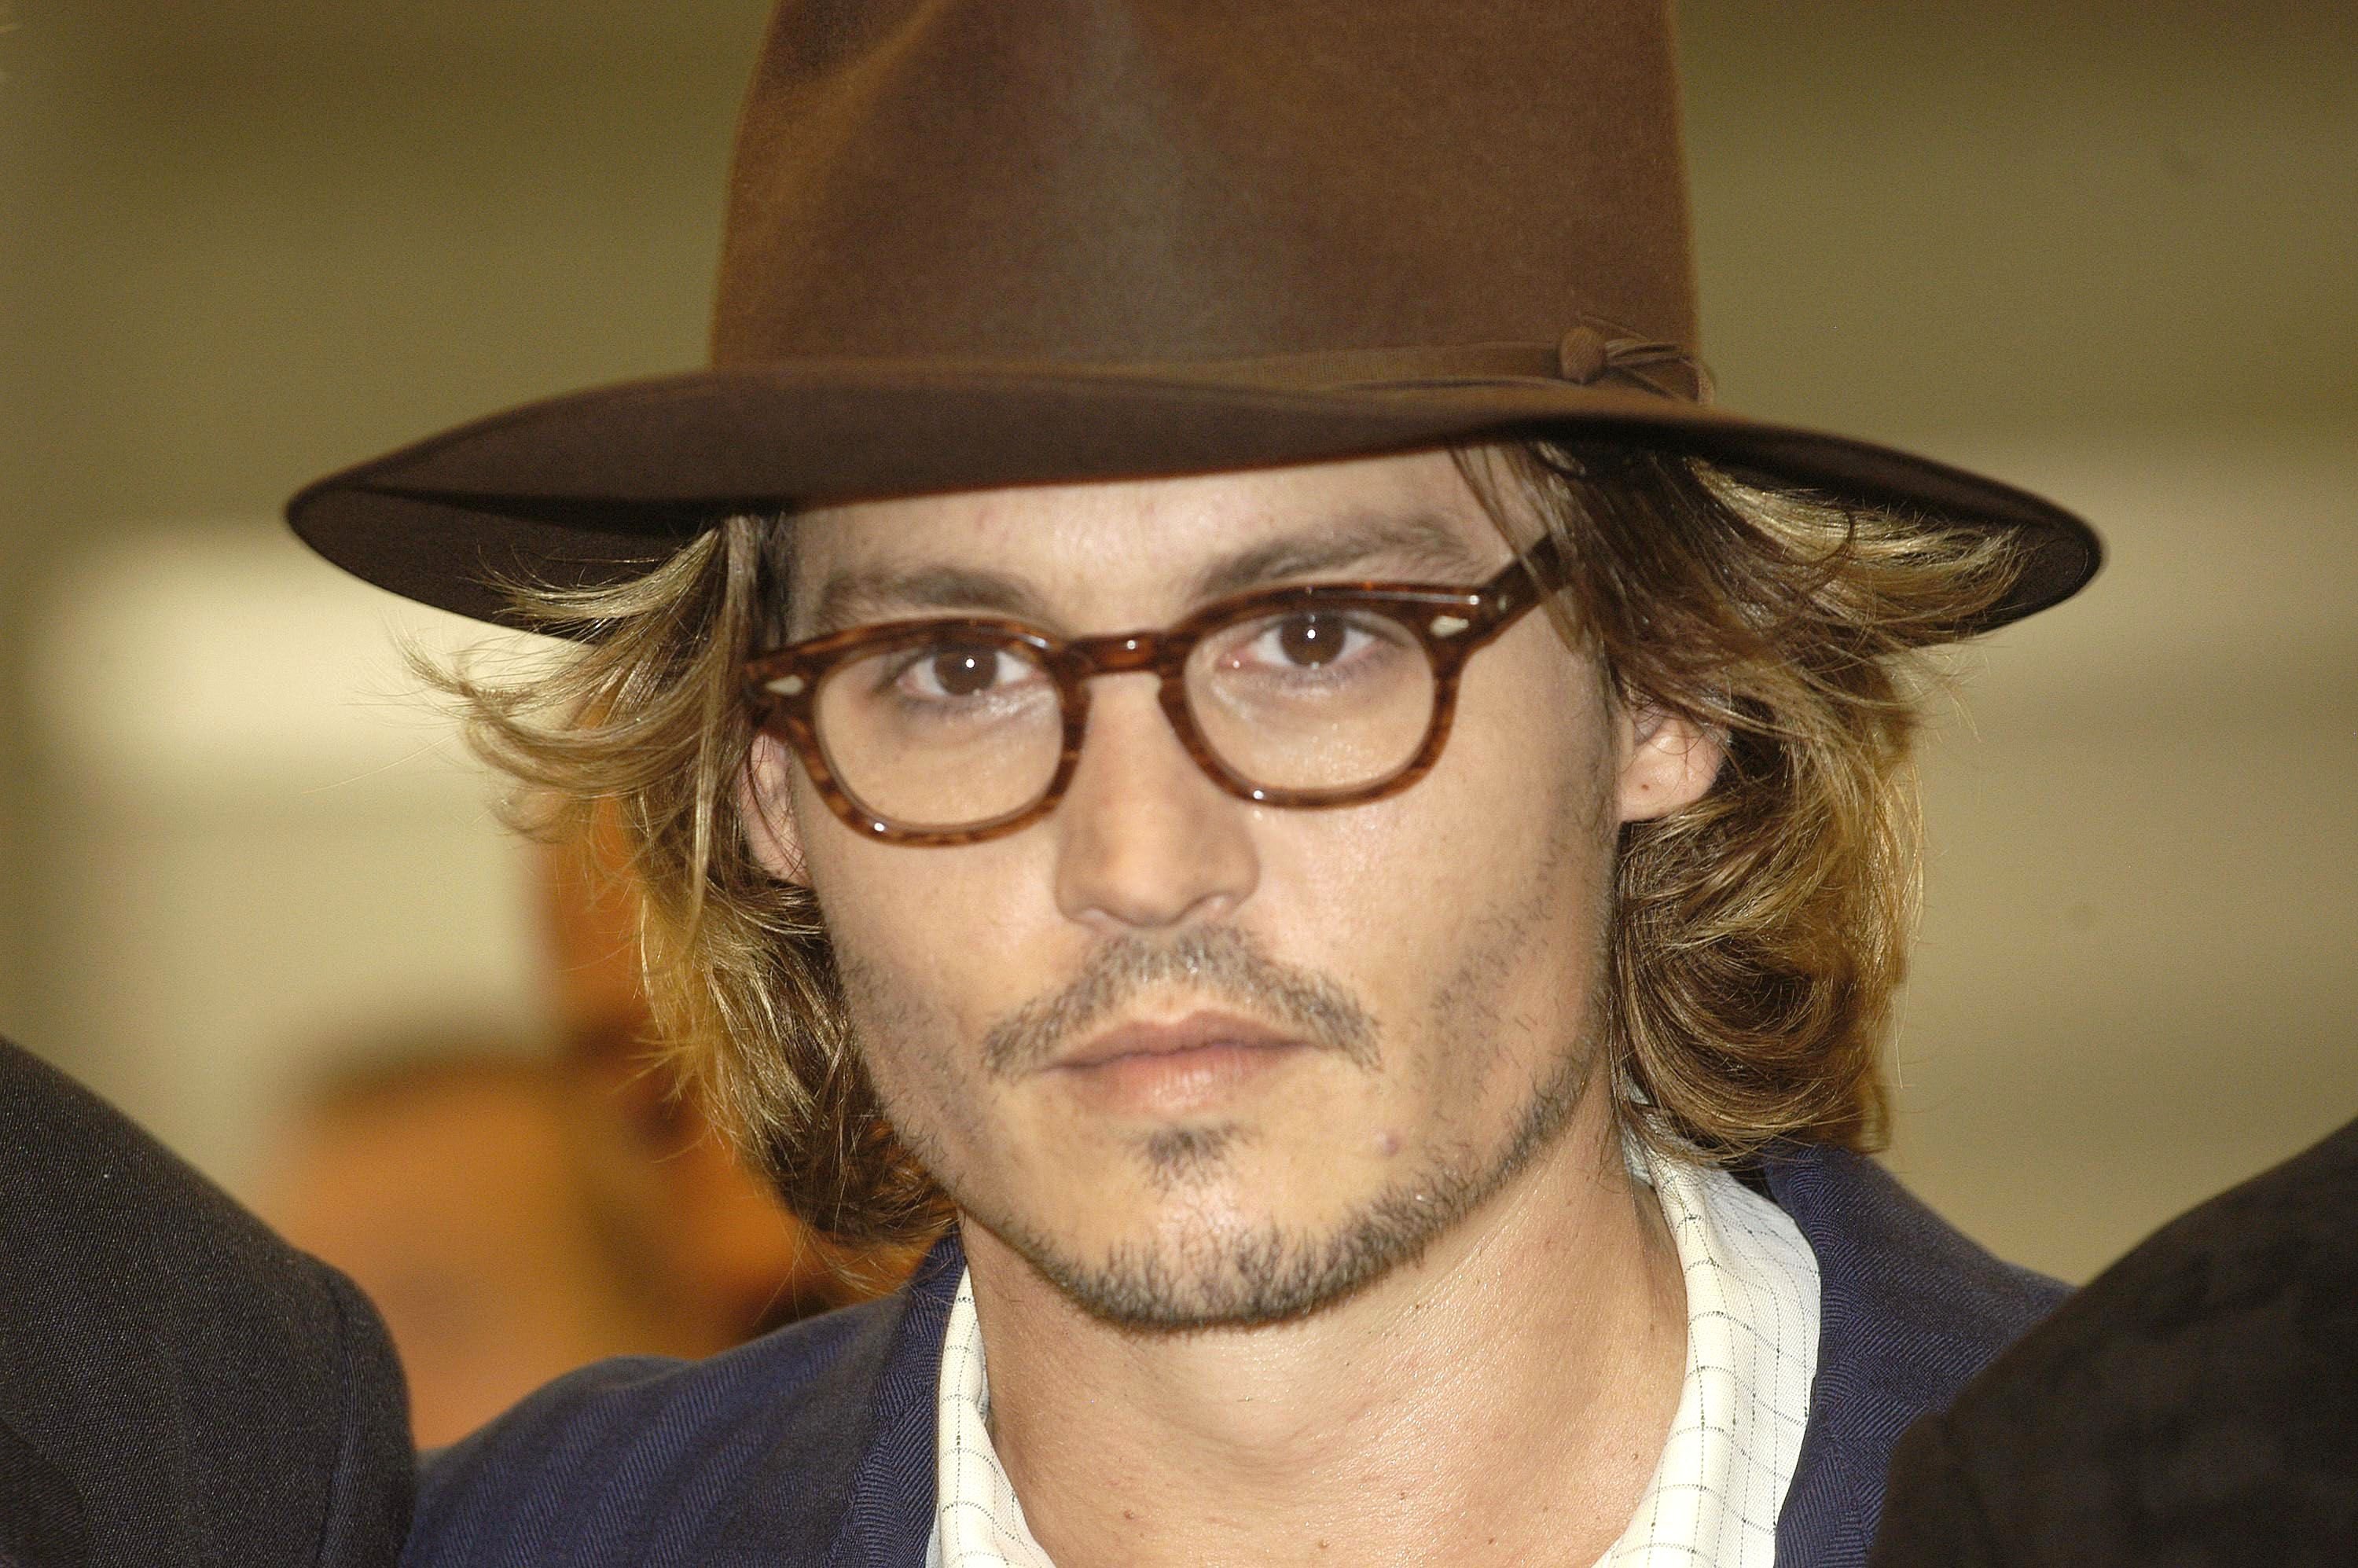 Johnny Depp at the premiere of "Once Upon a Time in Mexico" at the 60th Venice Film Festival on August 28, 2003, in Italy | Photo: Franco Origlia/Getty Images